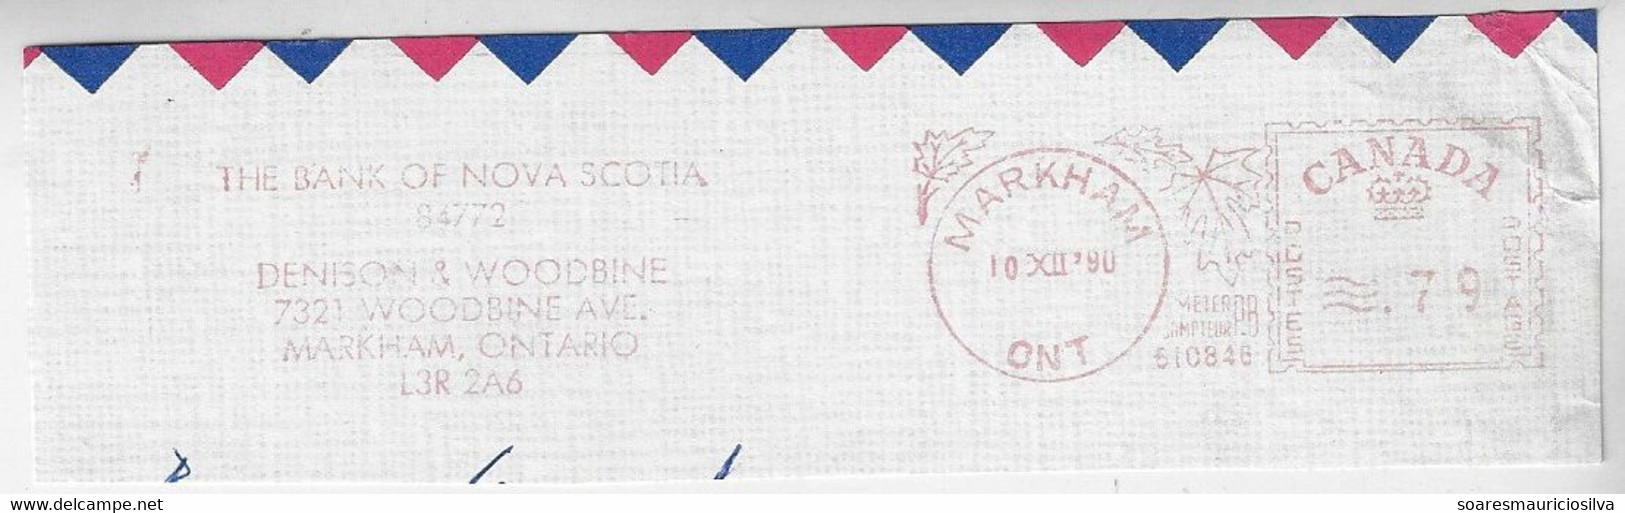 Canada 1990 Fragment Cover Meter Stamp Pitney Bowes 5300 Maple Leaf Ornaments Slogan Bank Of Nova Scotia In Markham - Cartas & Documentos